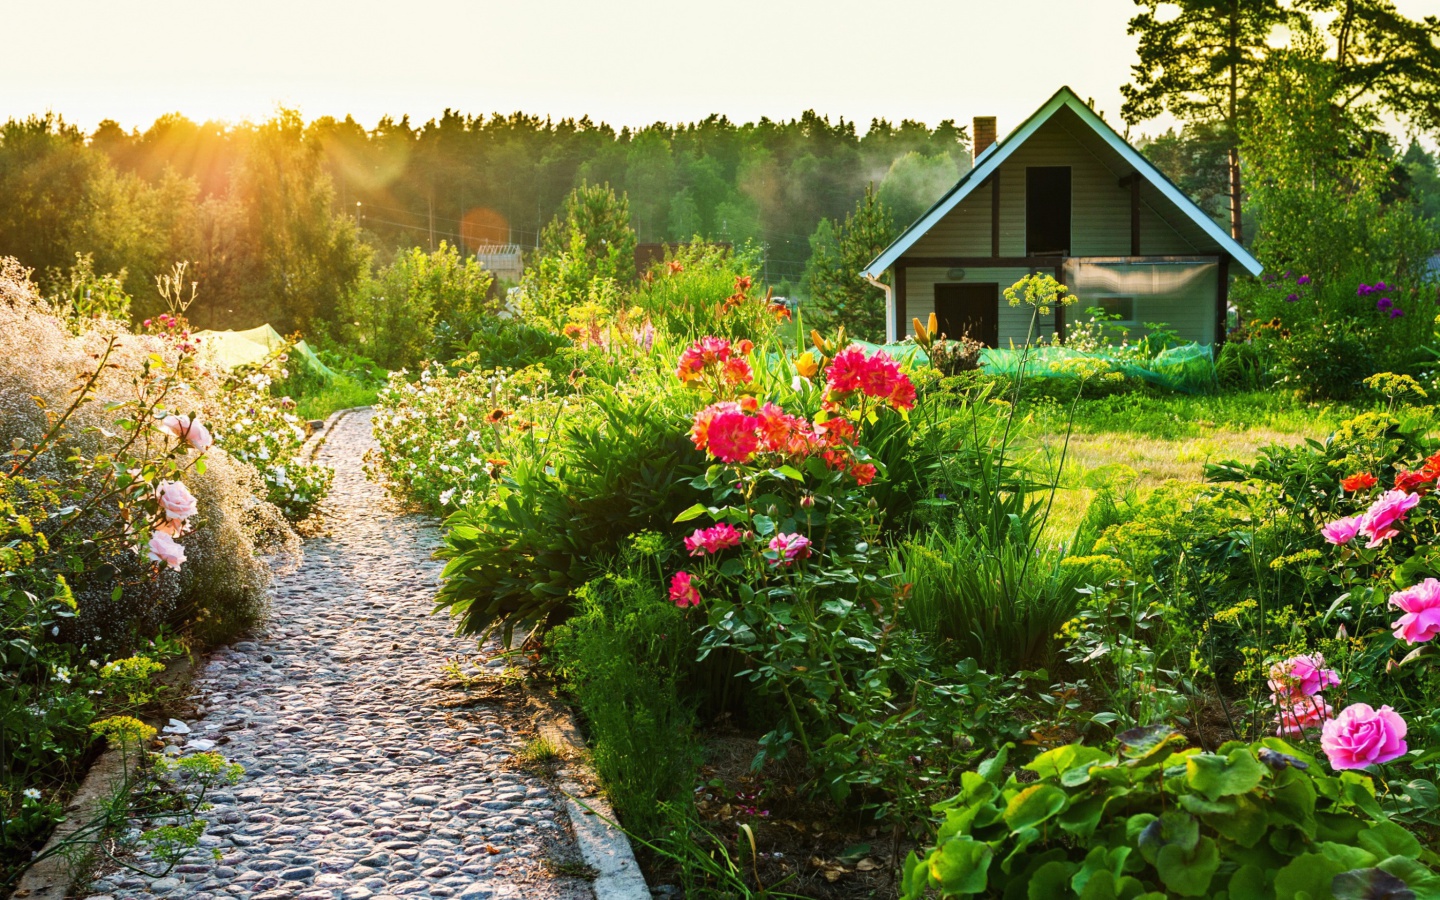 Country house with flowers wallpaper 1440x900